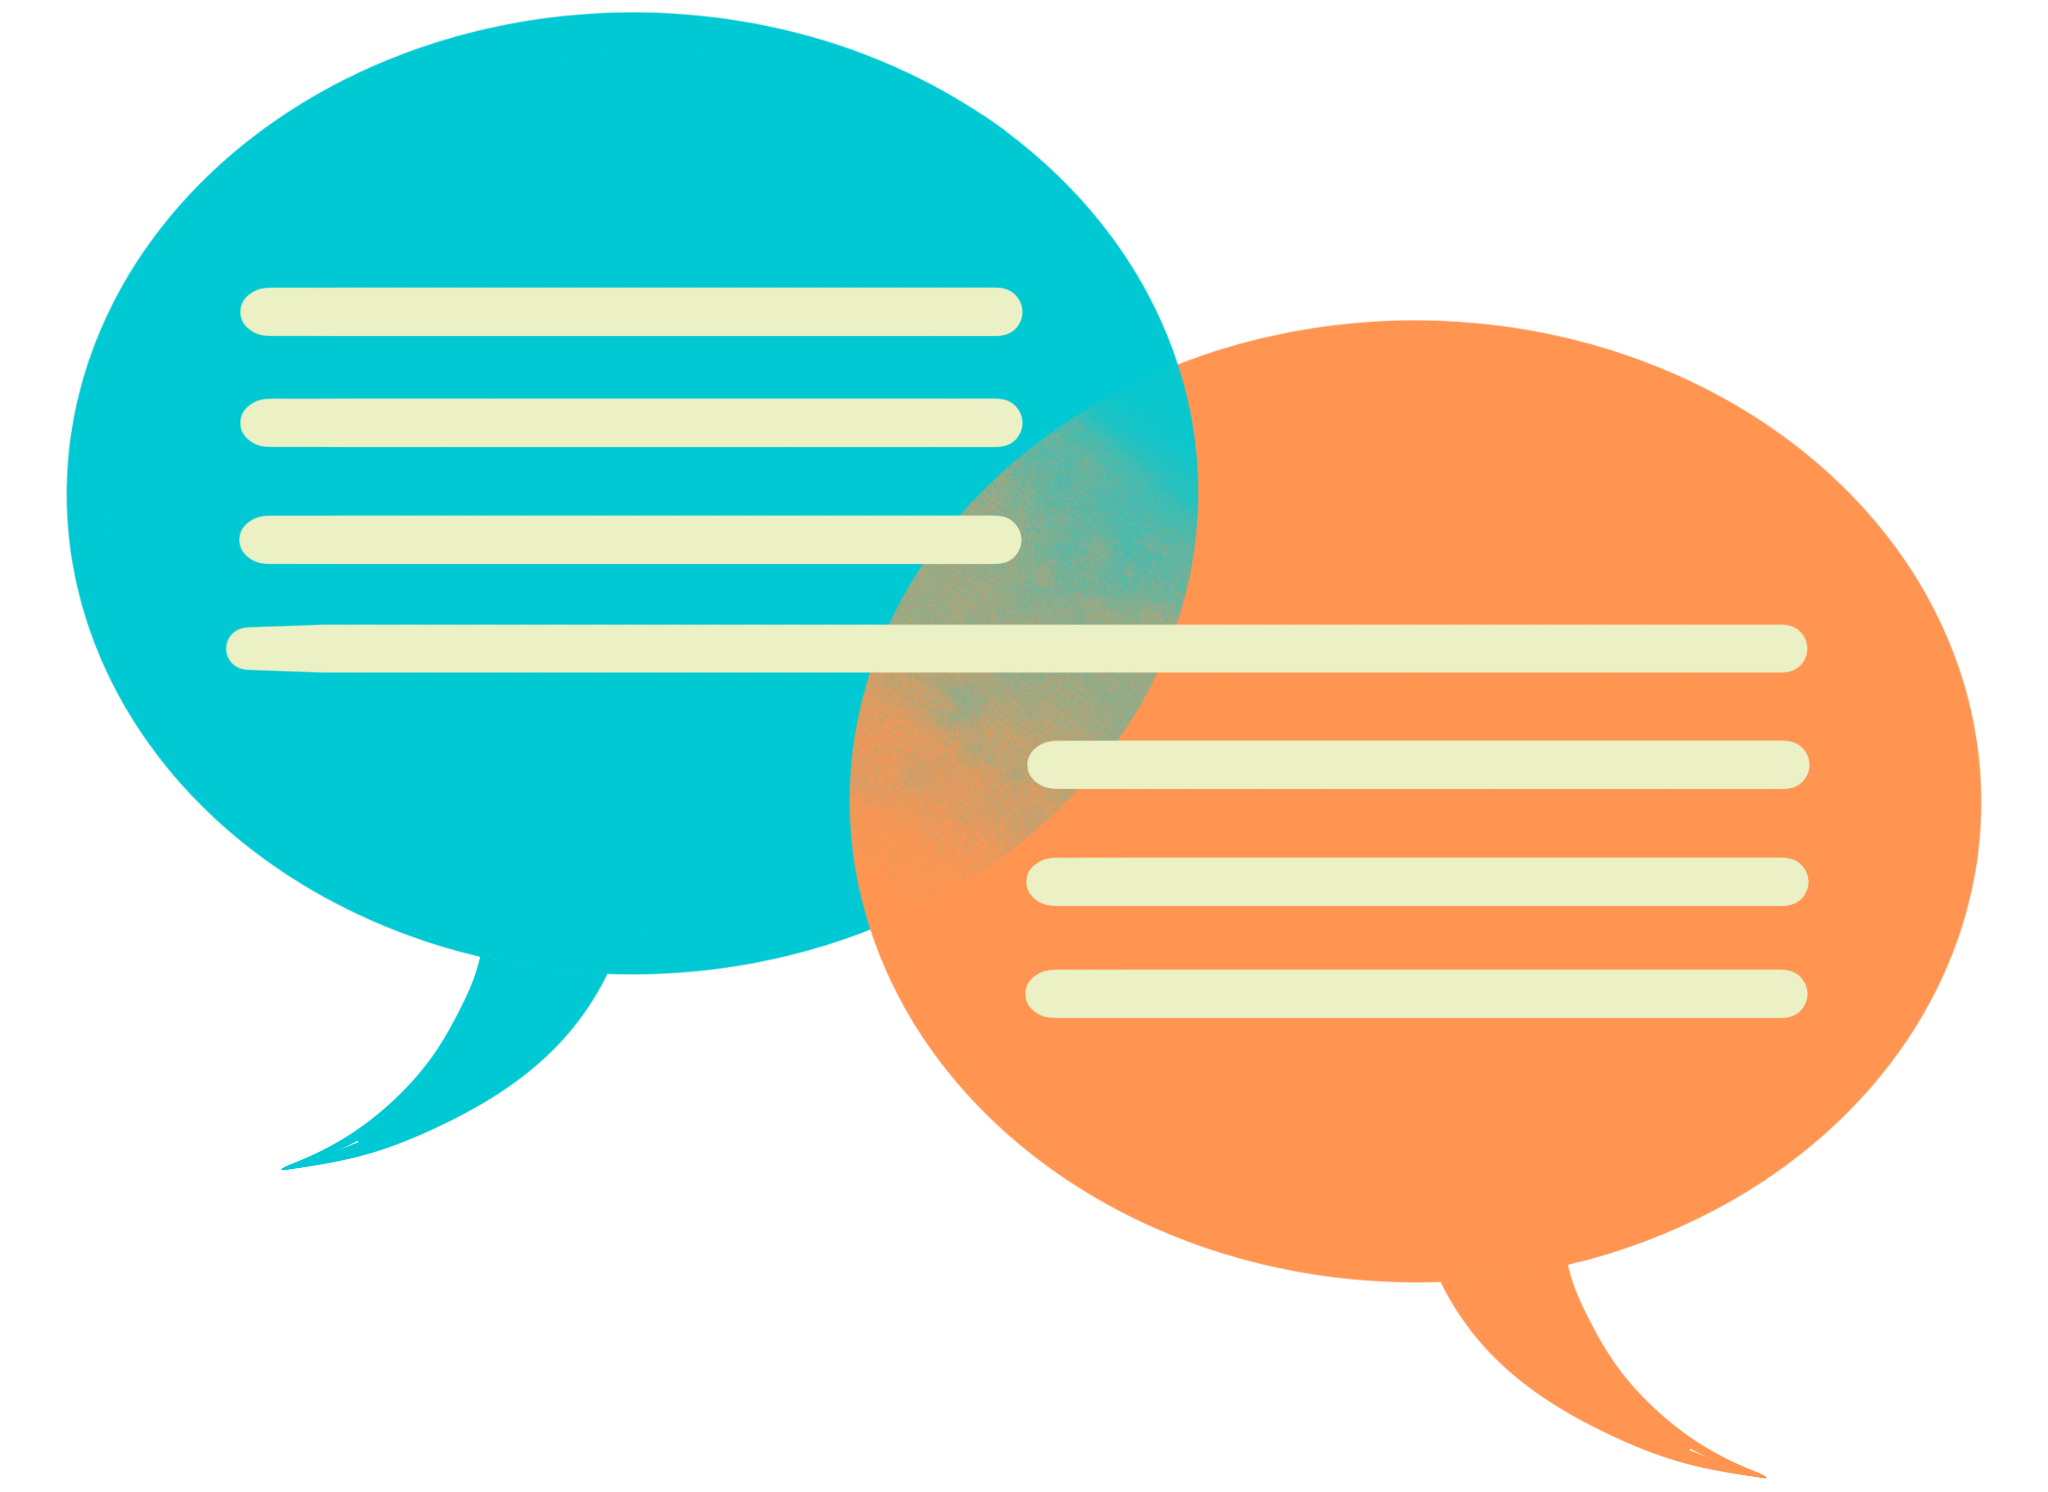 illustration of two speech bubbles representing communication